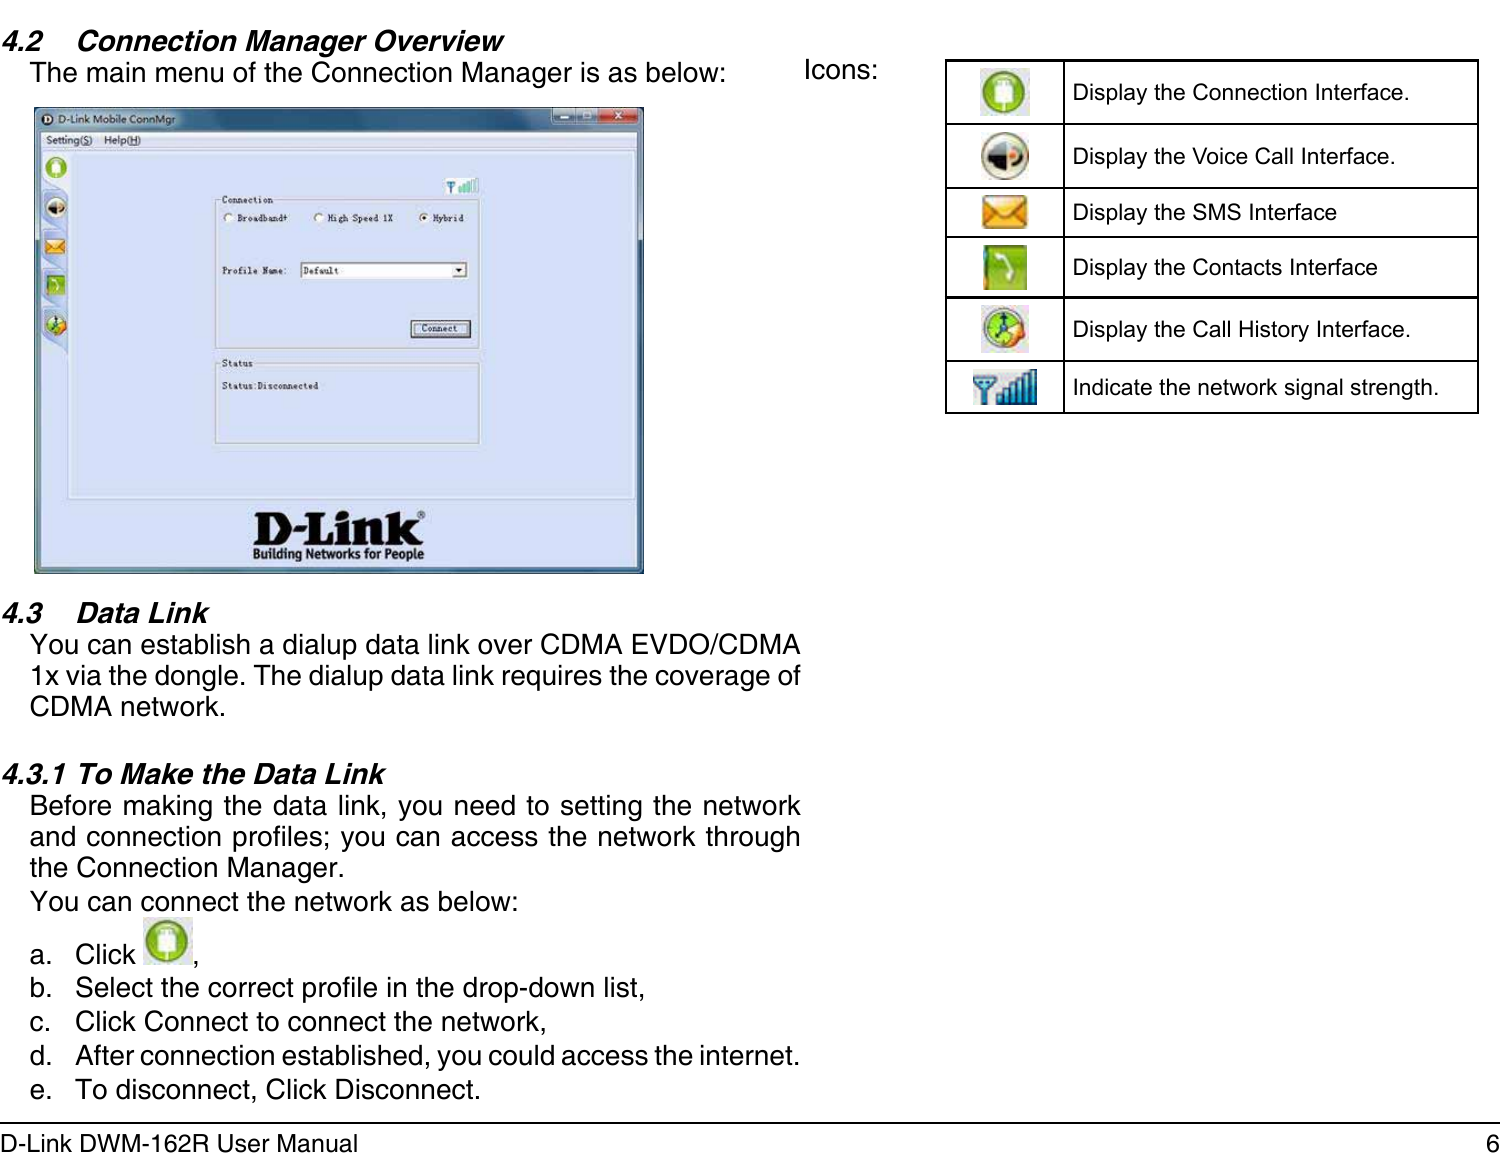 6D-Link DWM-162R User ManualSection 2 - Installation4.3.1 To Make the Data LinkBefore making the data link, you need to setting the network and connection proles; you can access the network through the Connection Manager.You can connect the network as below:a.  Click  ,b.  Select the correct prole in the drop-down list,c.  Click Connect to connect the network,d.  After connection established, you could access the internet.e.  To disconnect, Click Disconnect.4.3  Data LinkYou can establish a dialup data link over CDMA EVDO/CDMA 1x via the dongle. The dialup data link requires the coverage of CDMA network.4.2  Connection Manager OverviewThe main menu of the Connection Manager is as below: Icons: Display the Connection Interface.Display the Voice Call Interface.Display the SMS InterfaceDisplay the Contacts InterfaceDisplay the Call History Interface.Indicate the network signal strength.